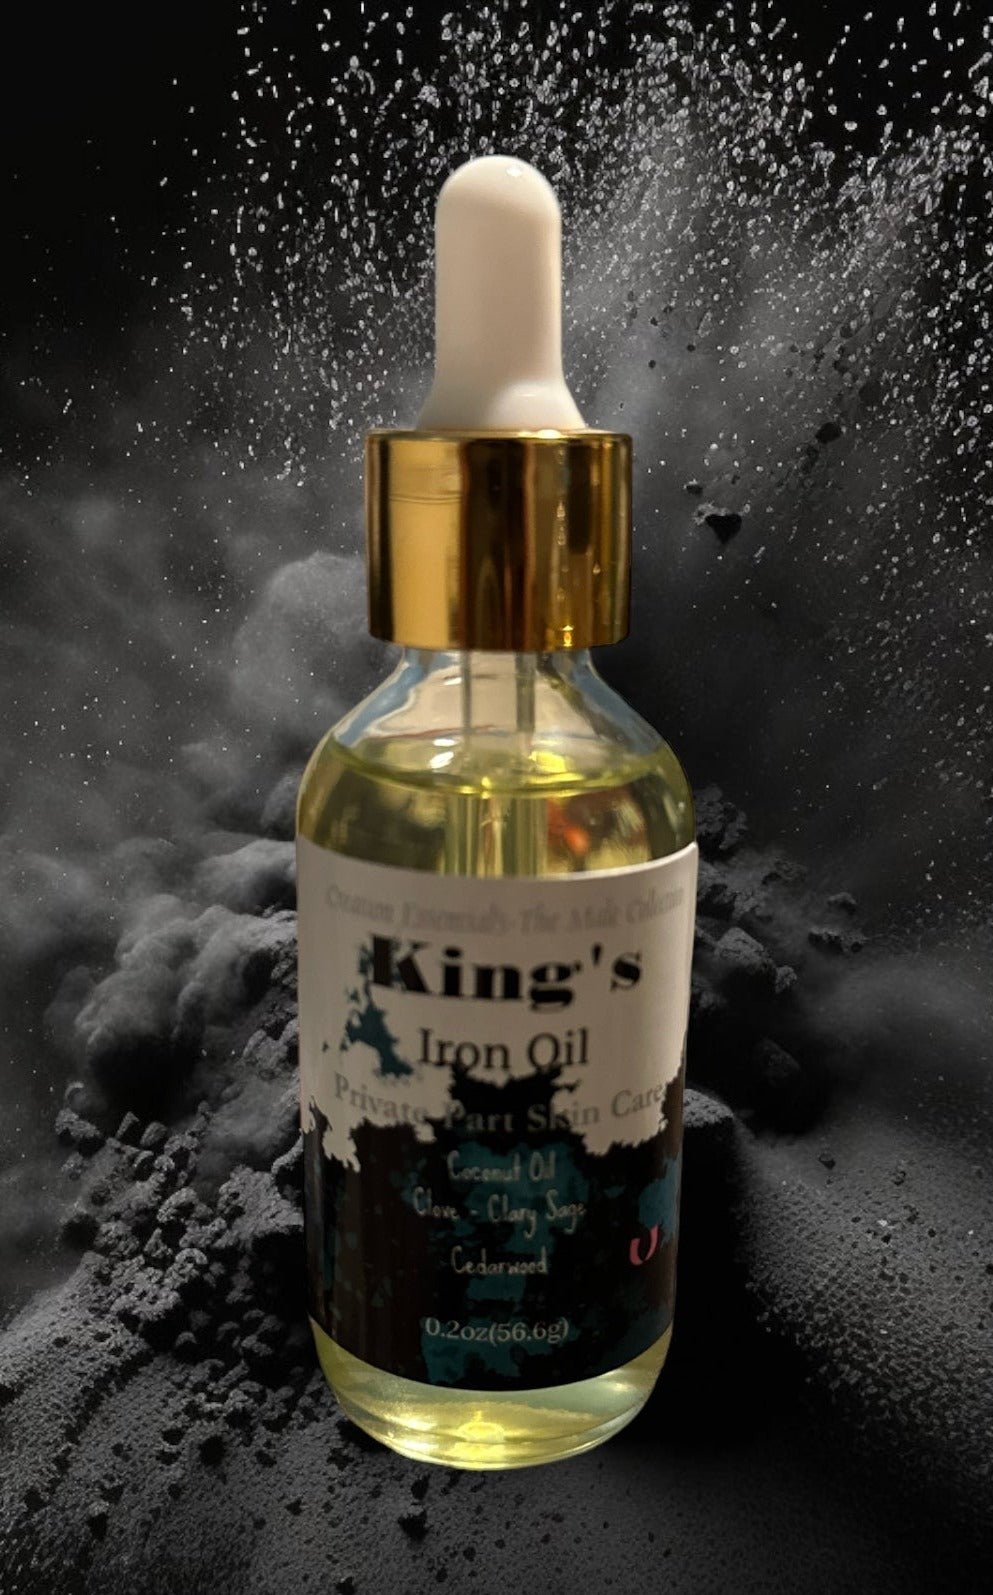 King's Iron Oil -For That Special Private Place